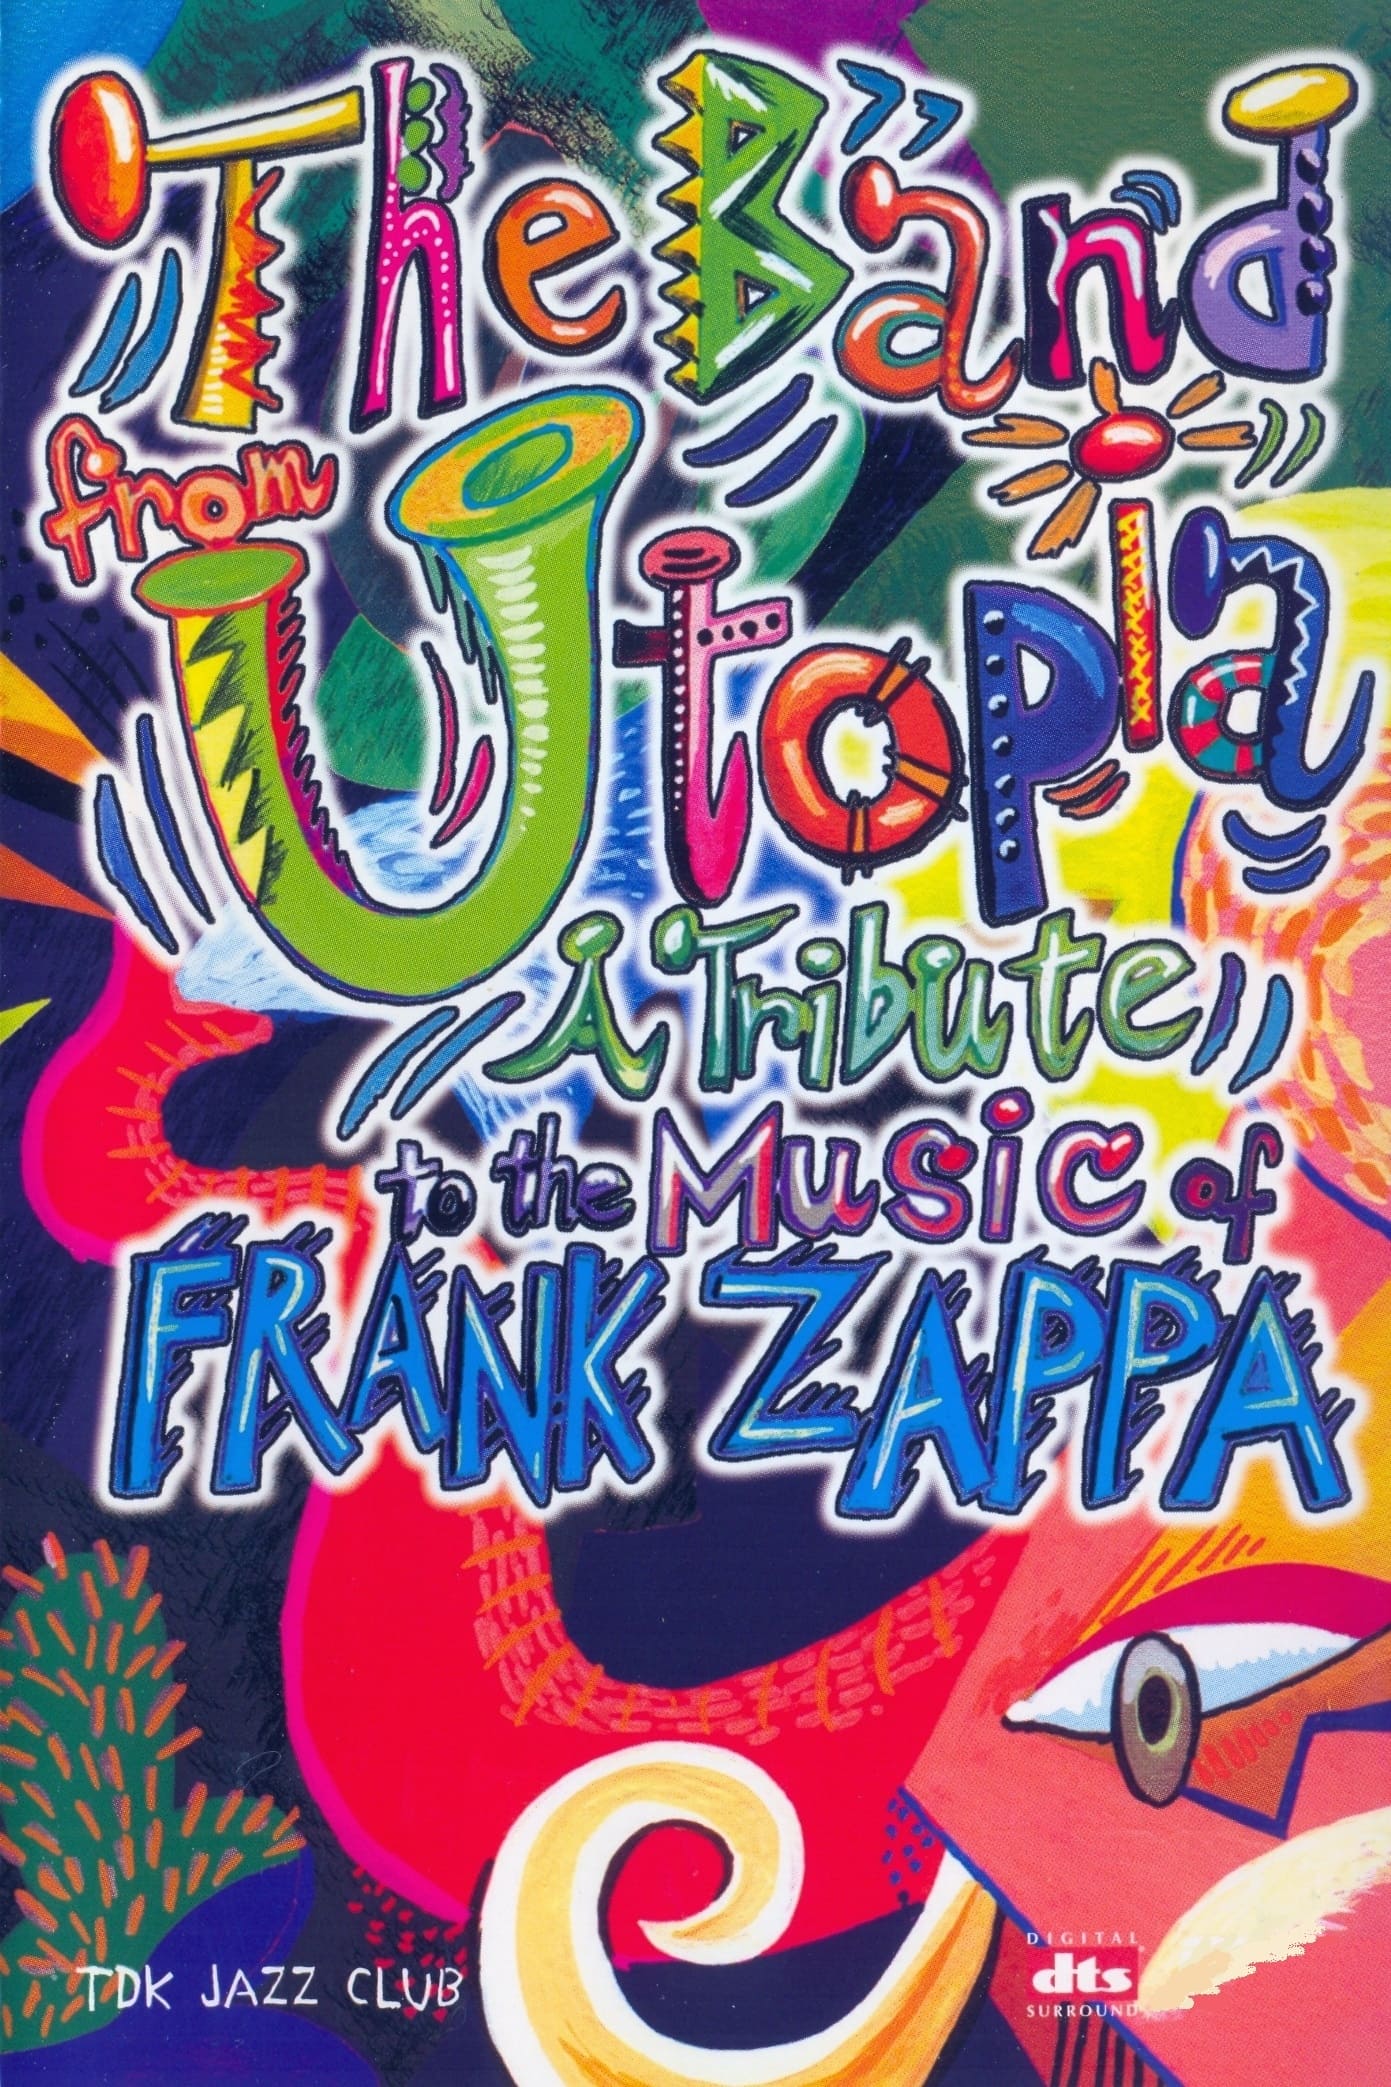 Band from Utopia: A Tribute to the Music of Frank Zappa